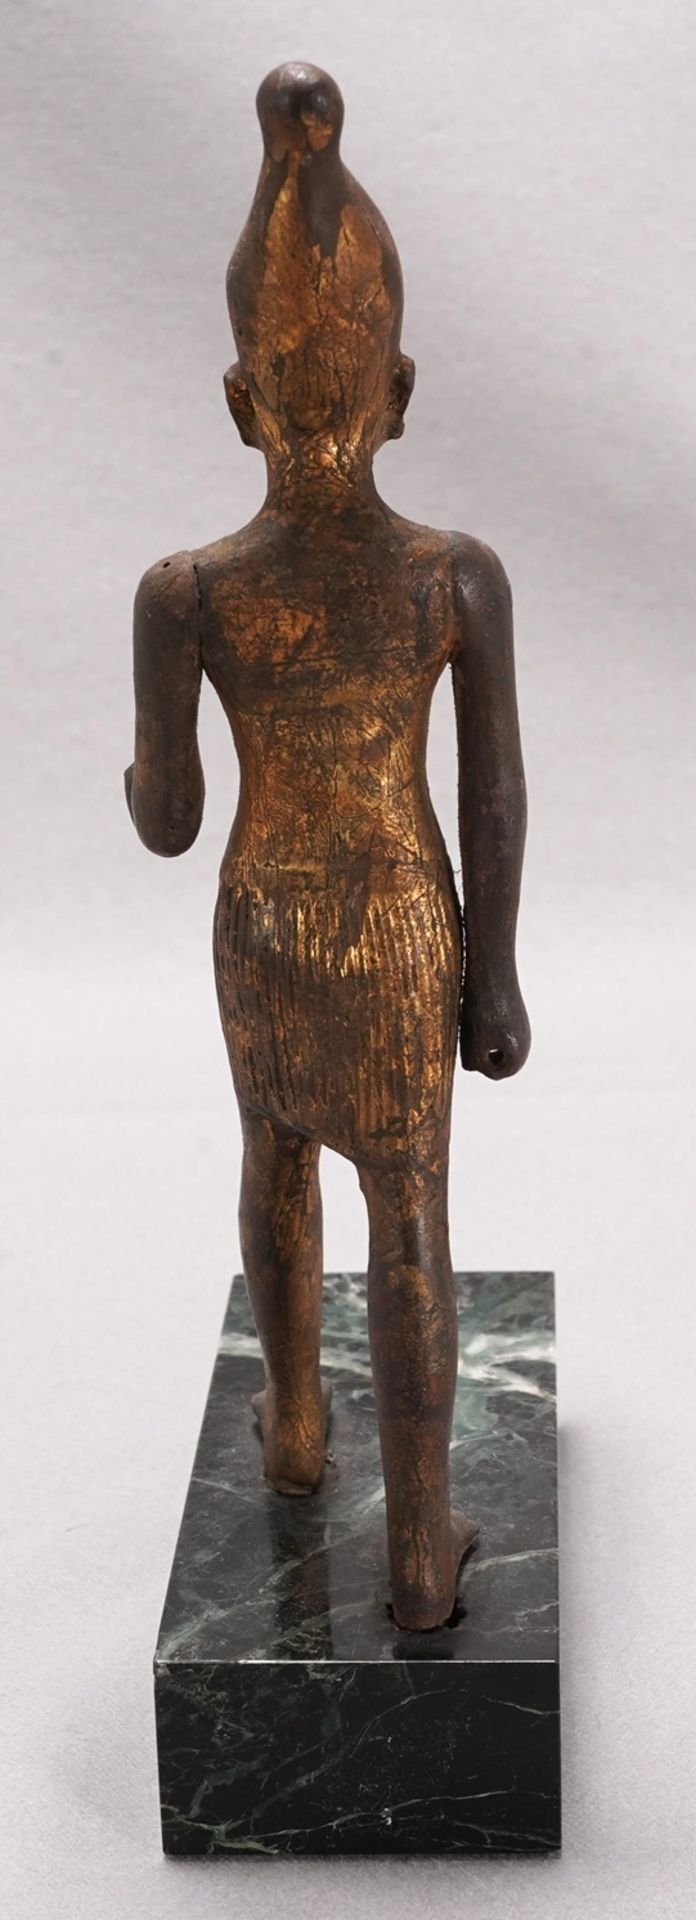 Striding Osiris with Pschent crown - Image 3 of 4